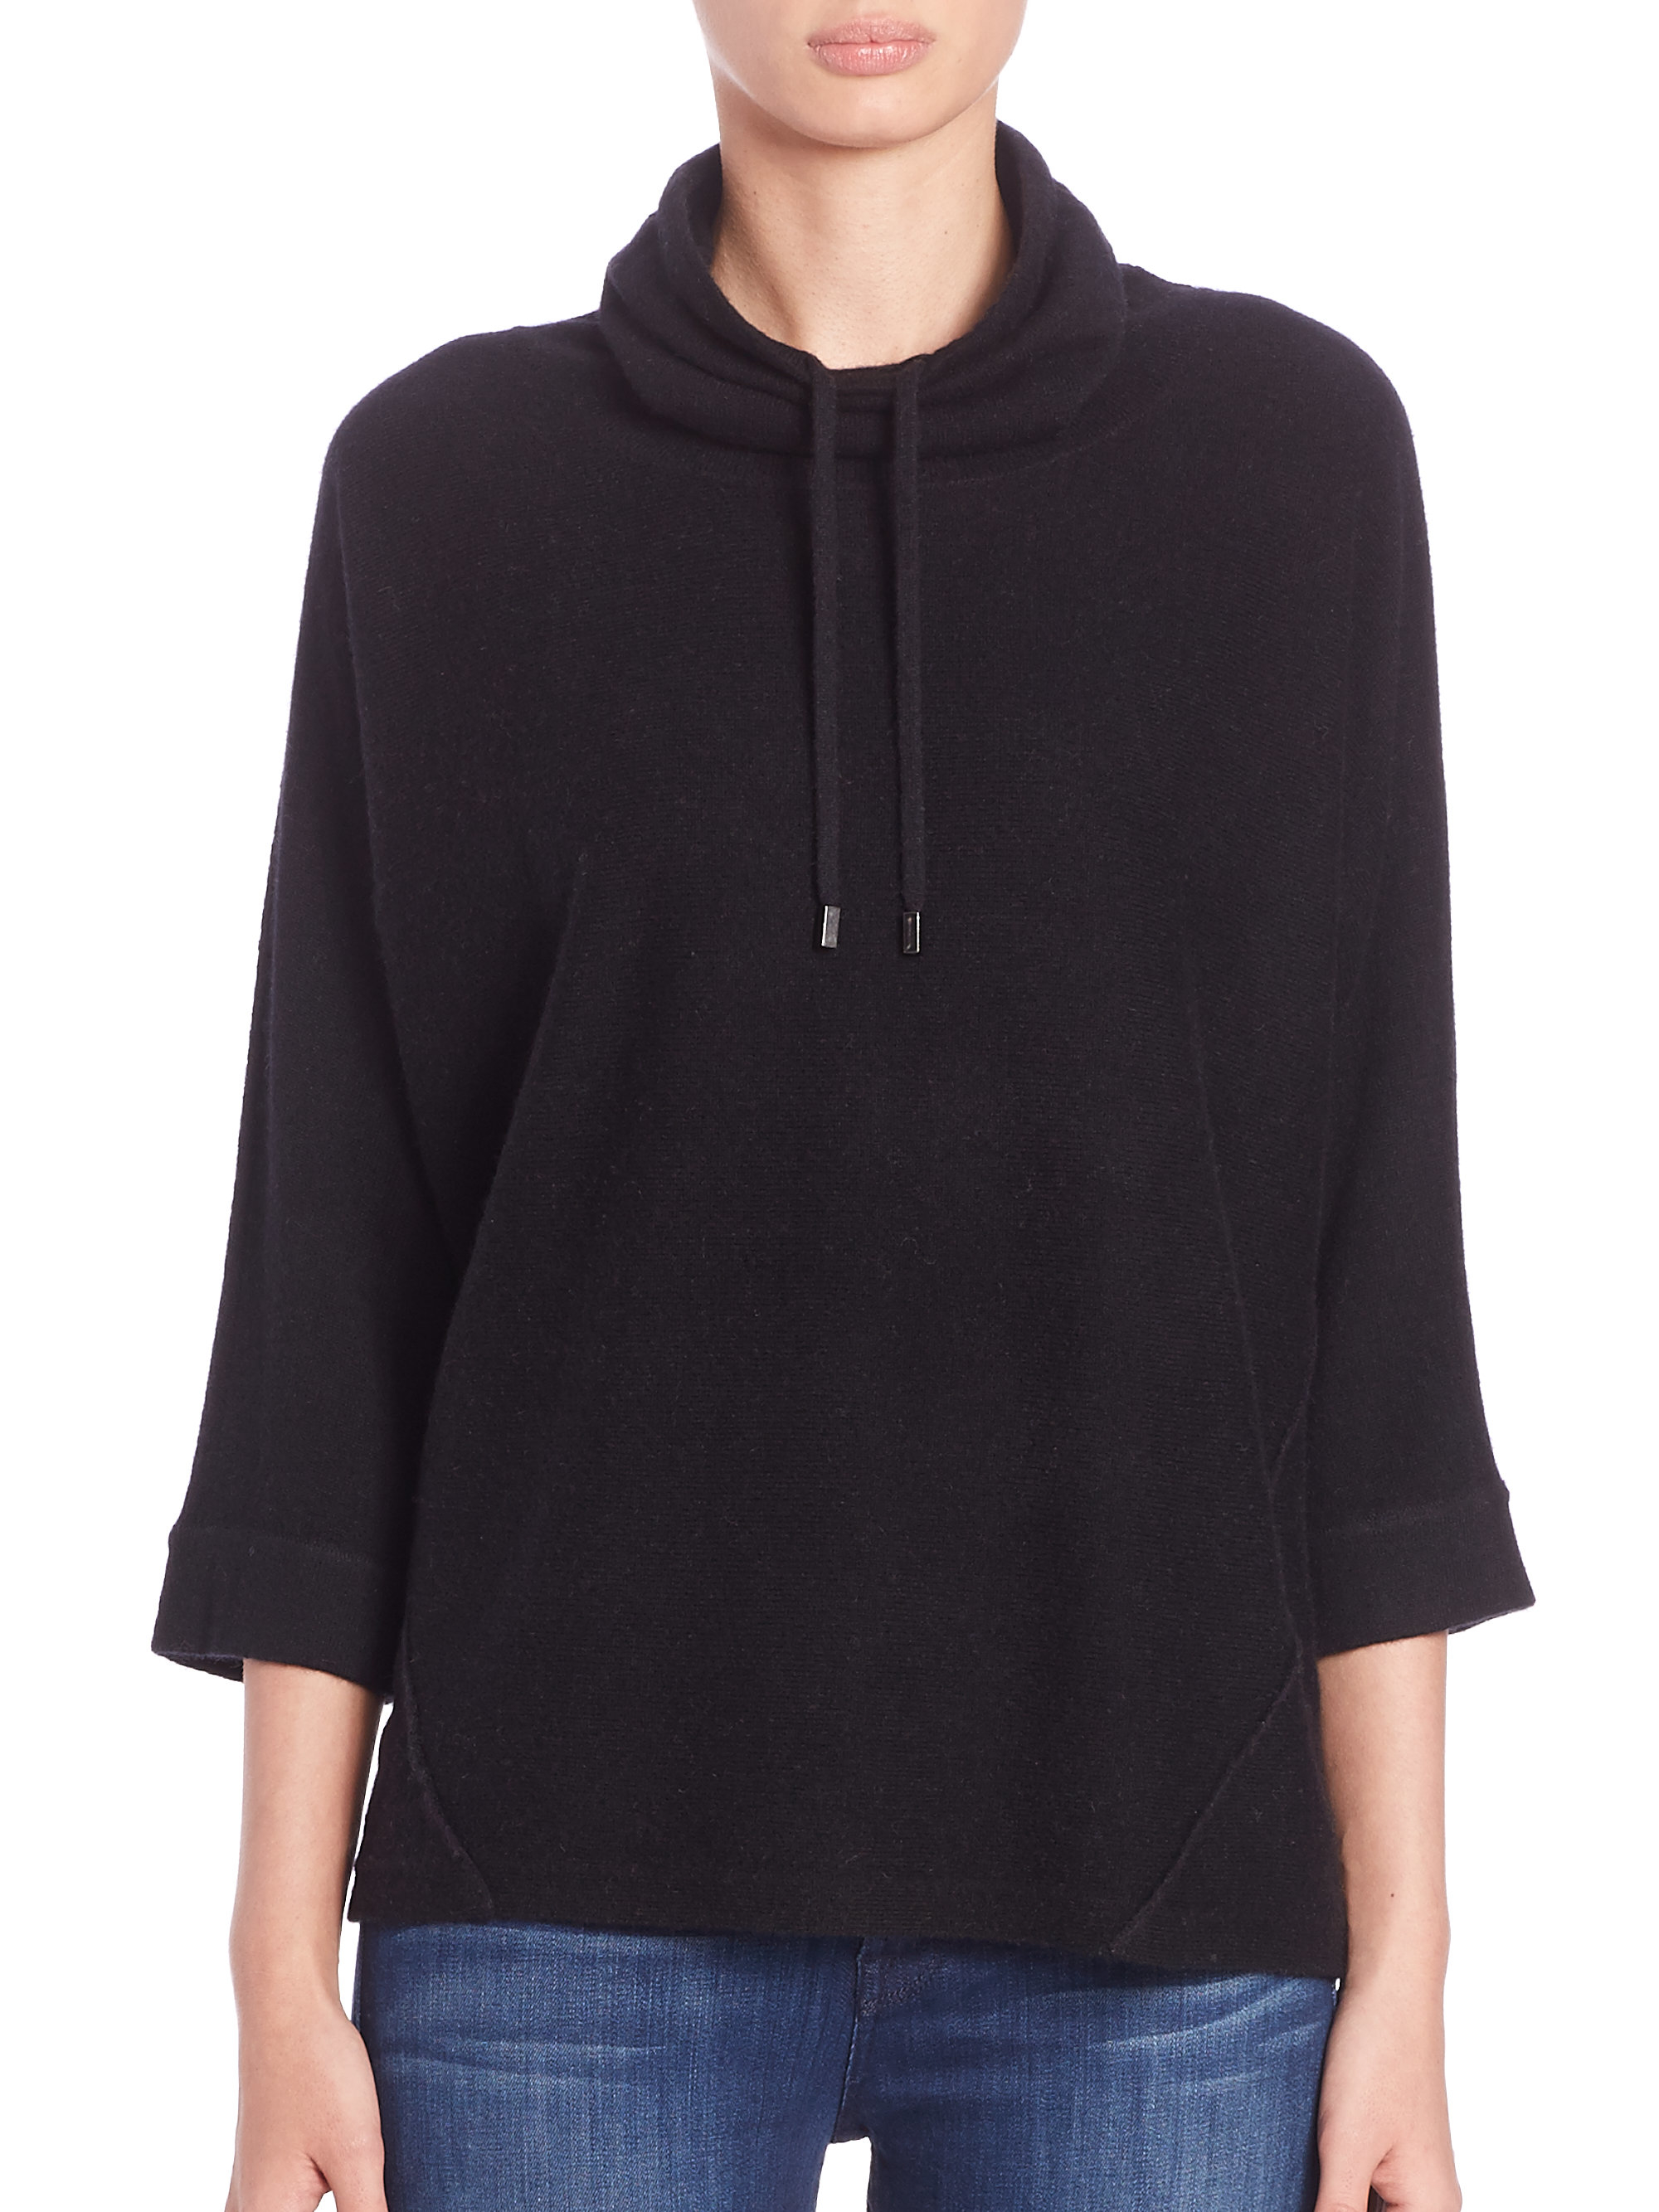 Saks fifth avenue Cashmere Cowlneck Drawstring Sweater in Black | Lyst